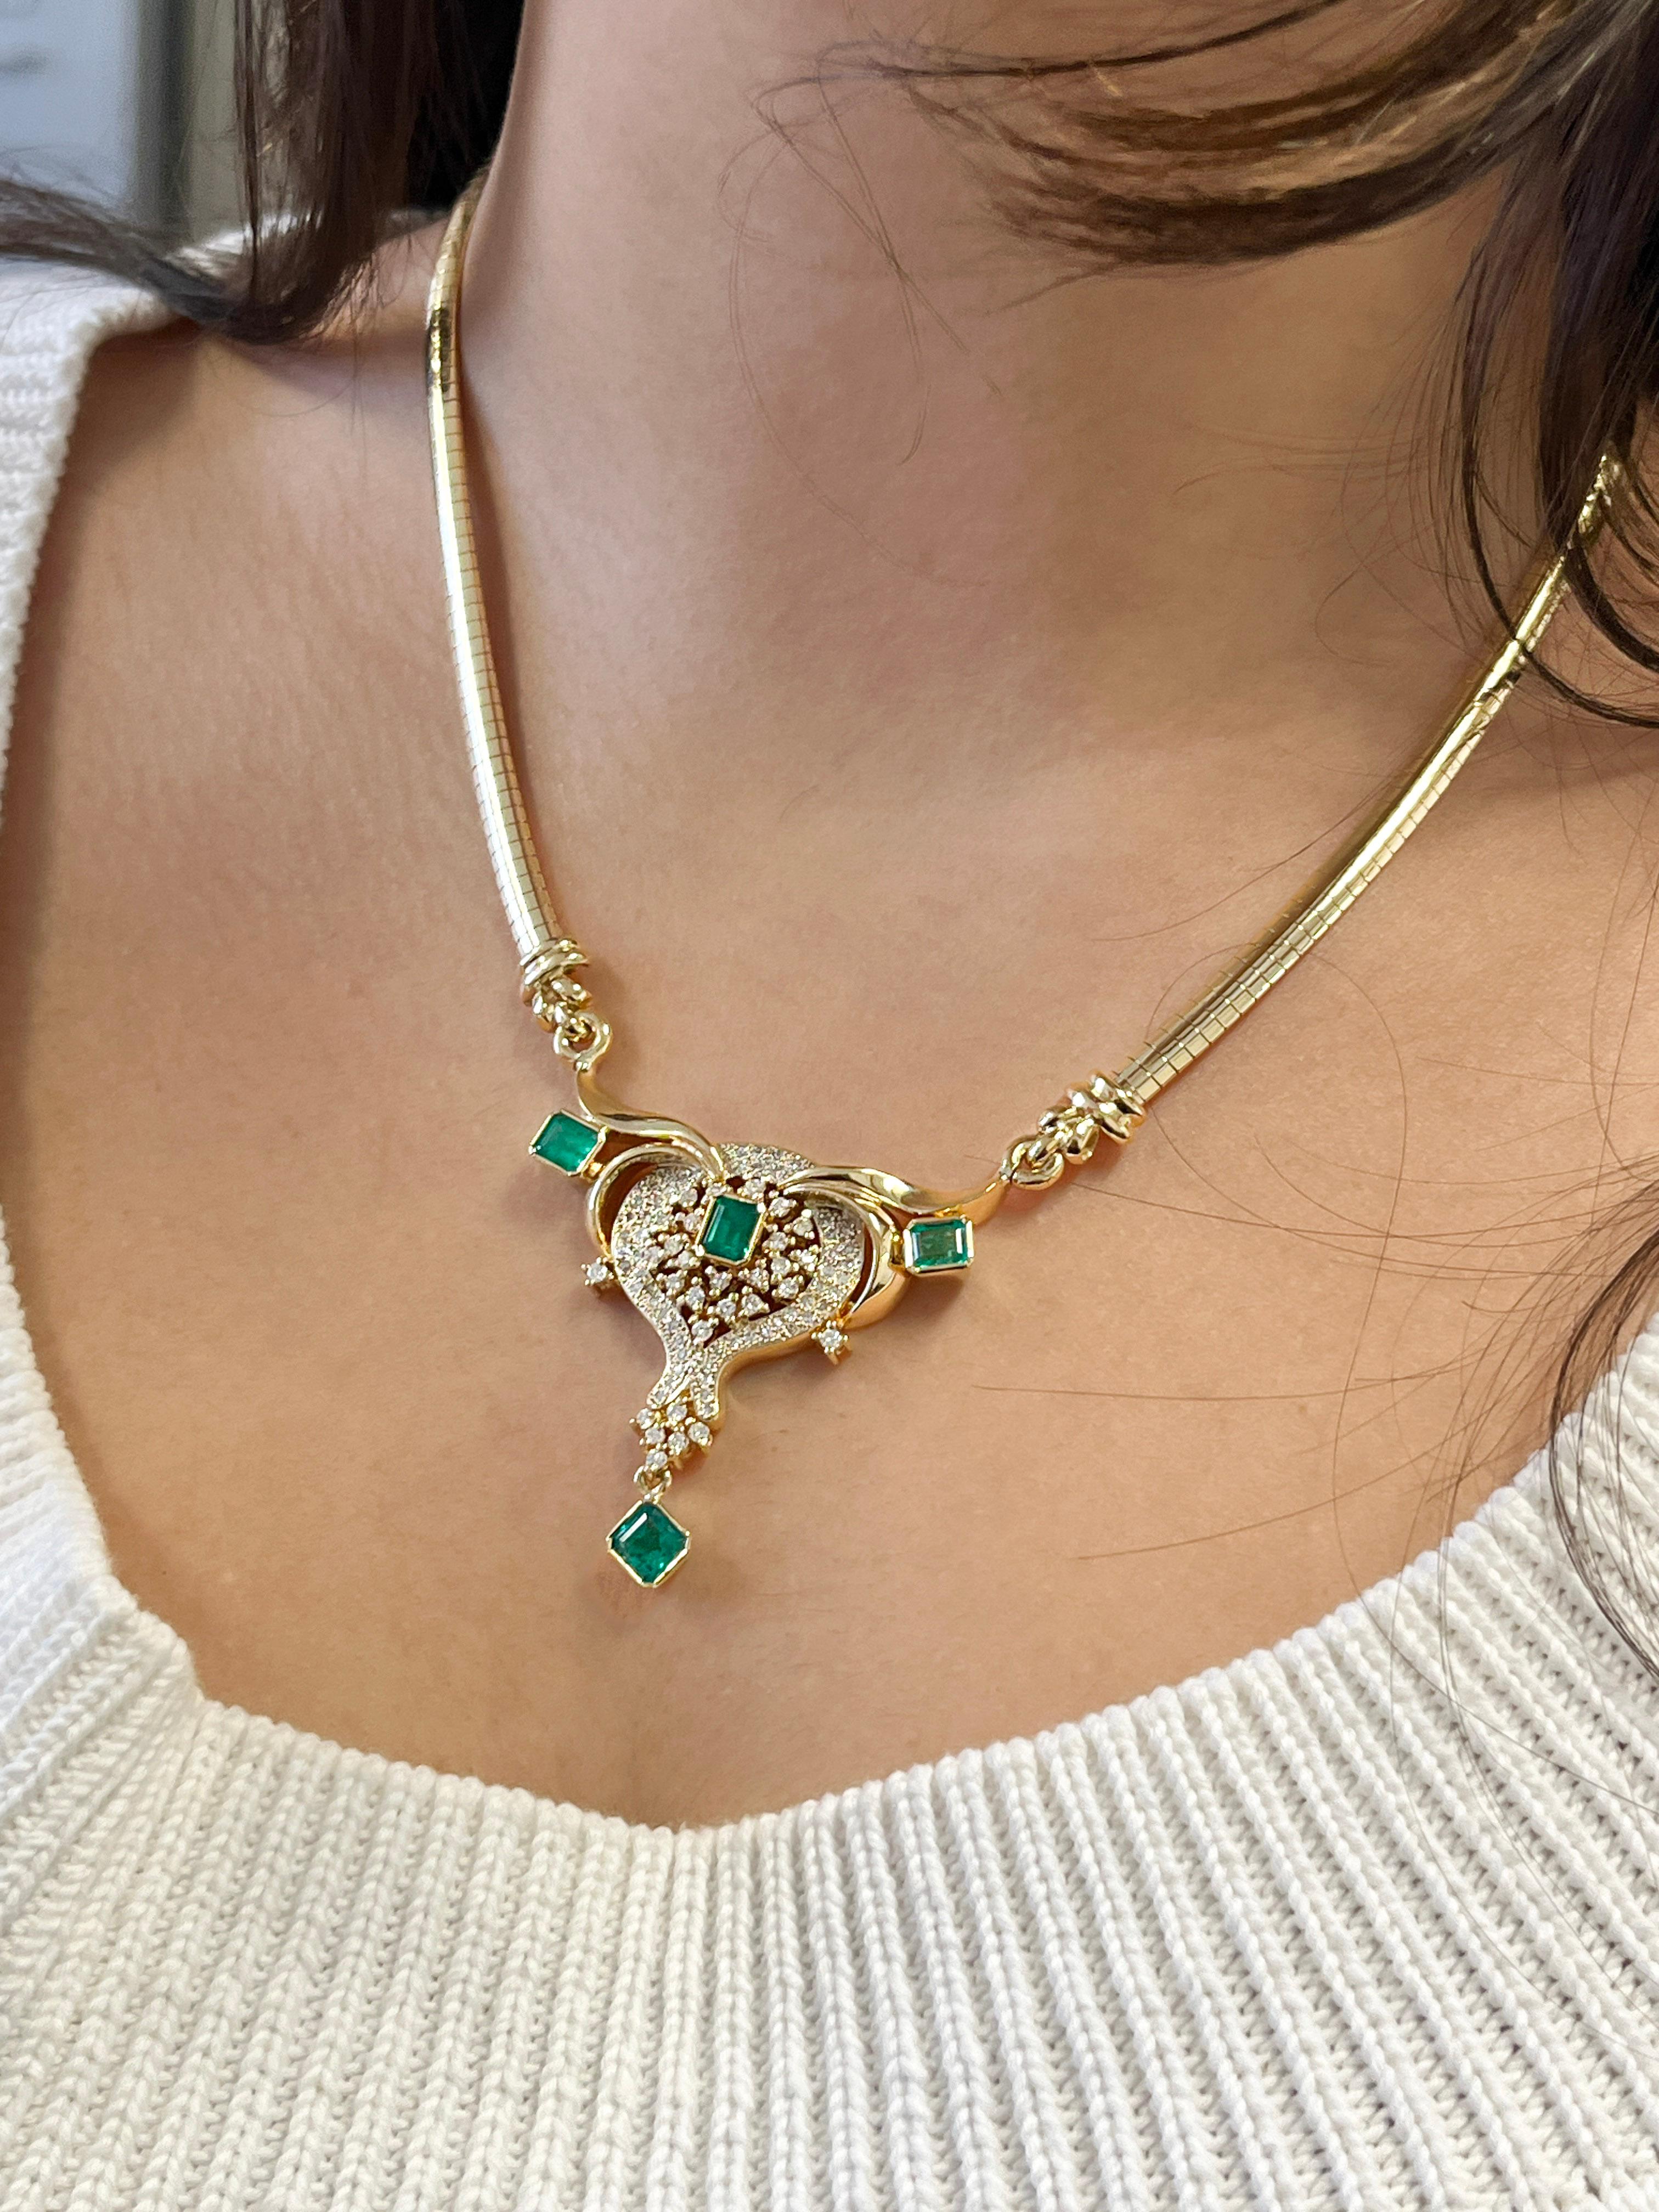 Vintage Emerald & Diamond Necklace in 14K Yellow Gold. 

This necklace features an emerald-cut emerald center stone, weighing 5 carats total. The emerald is paired with round-cut white diamond detailing, weighing 1 carat total. The necklace is